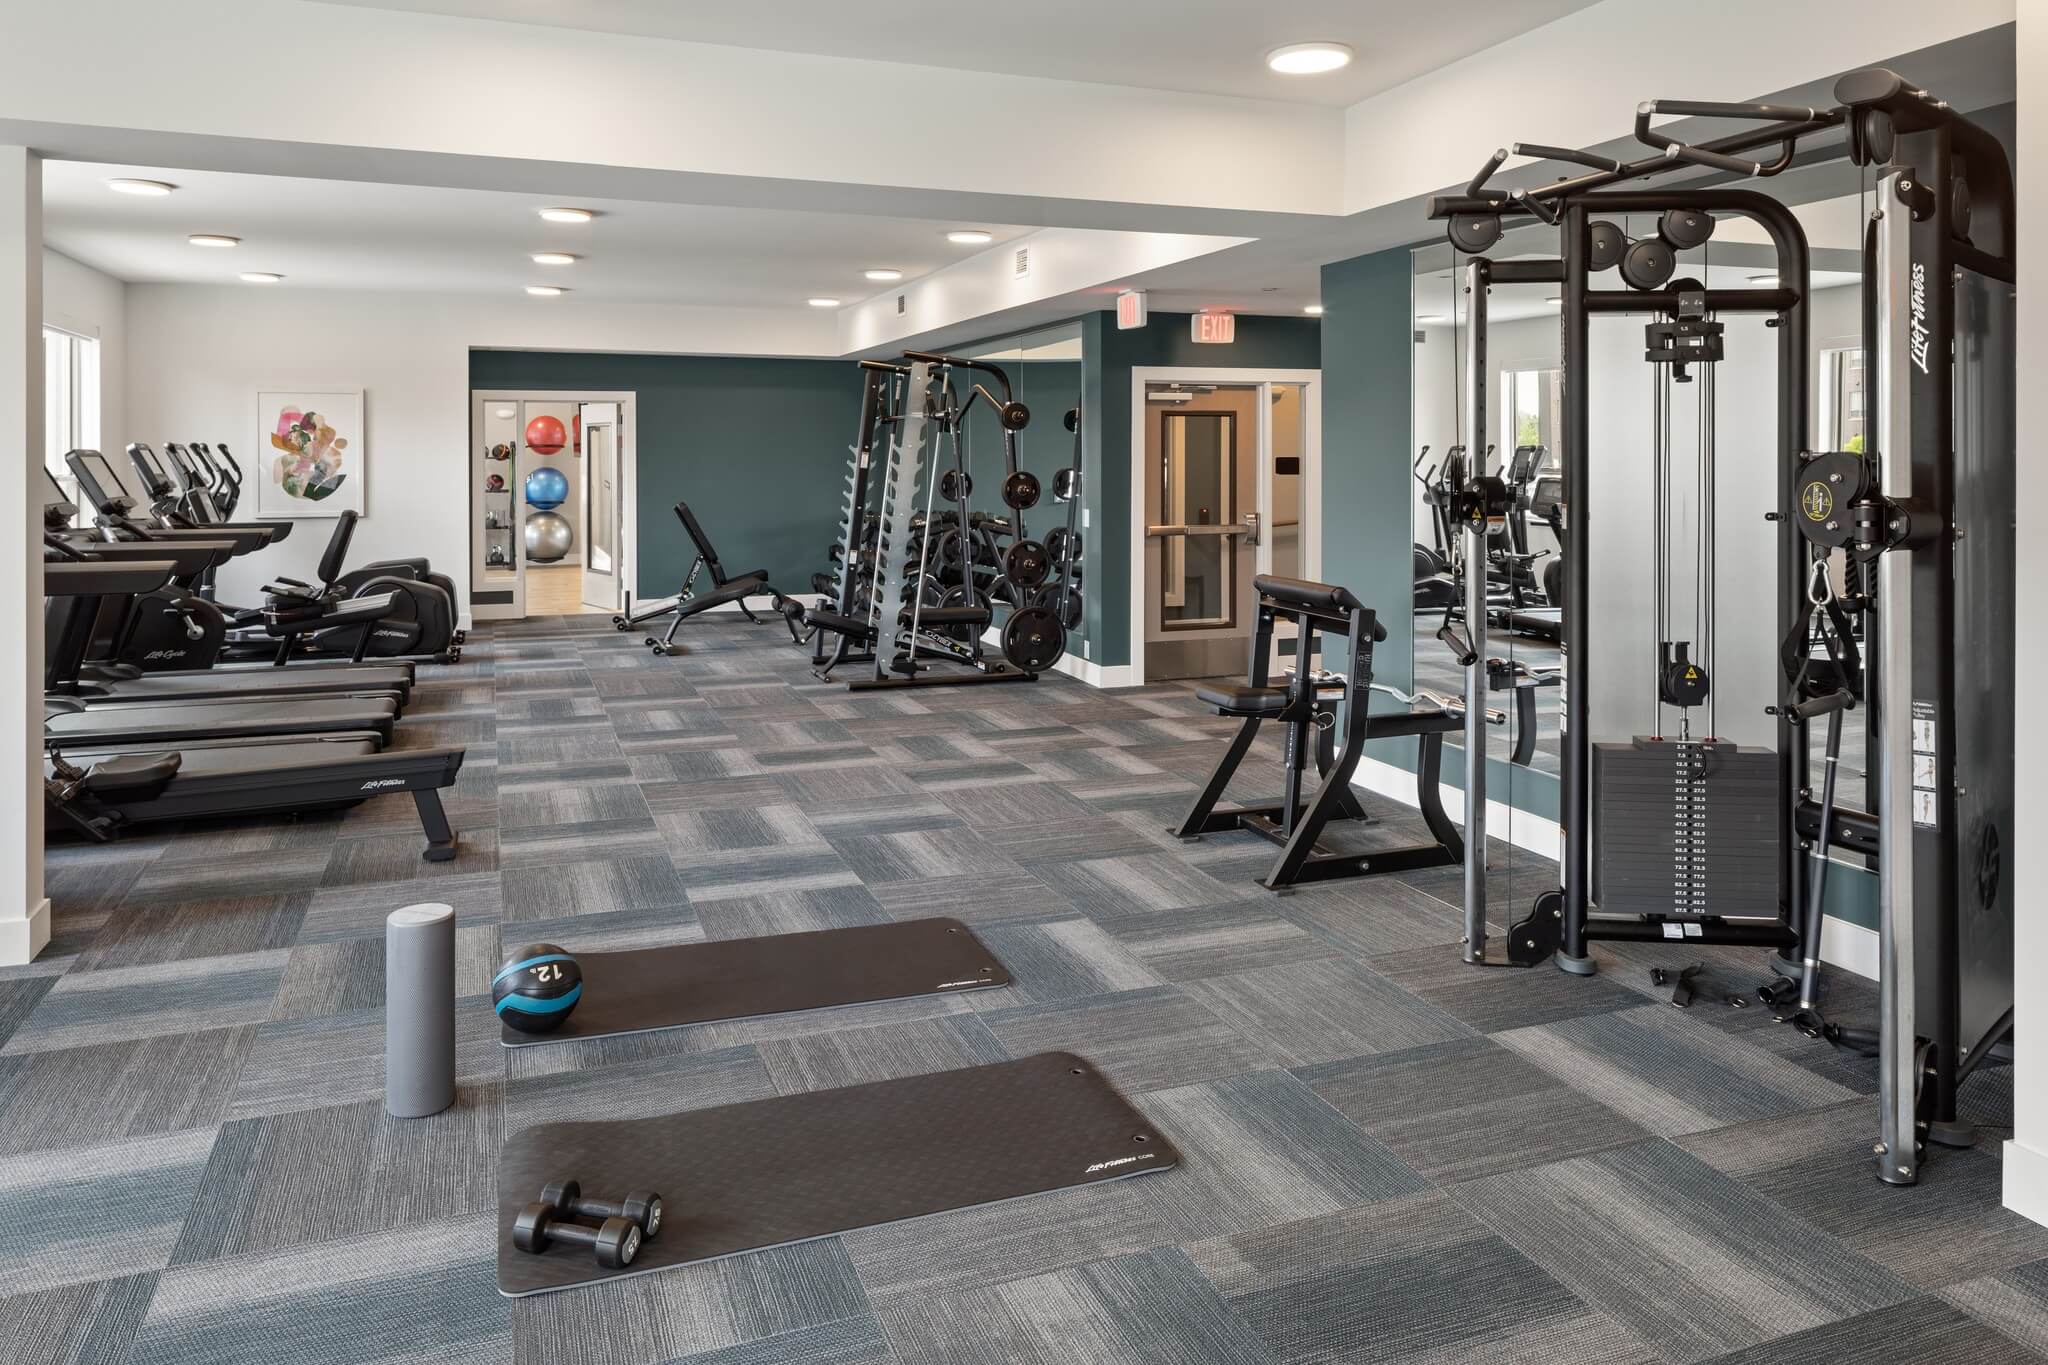 Aster at Riverdale Station fitness center with yoga mats, weight racks, and cardio equipment